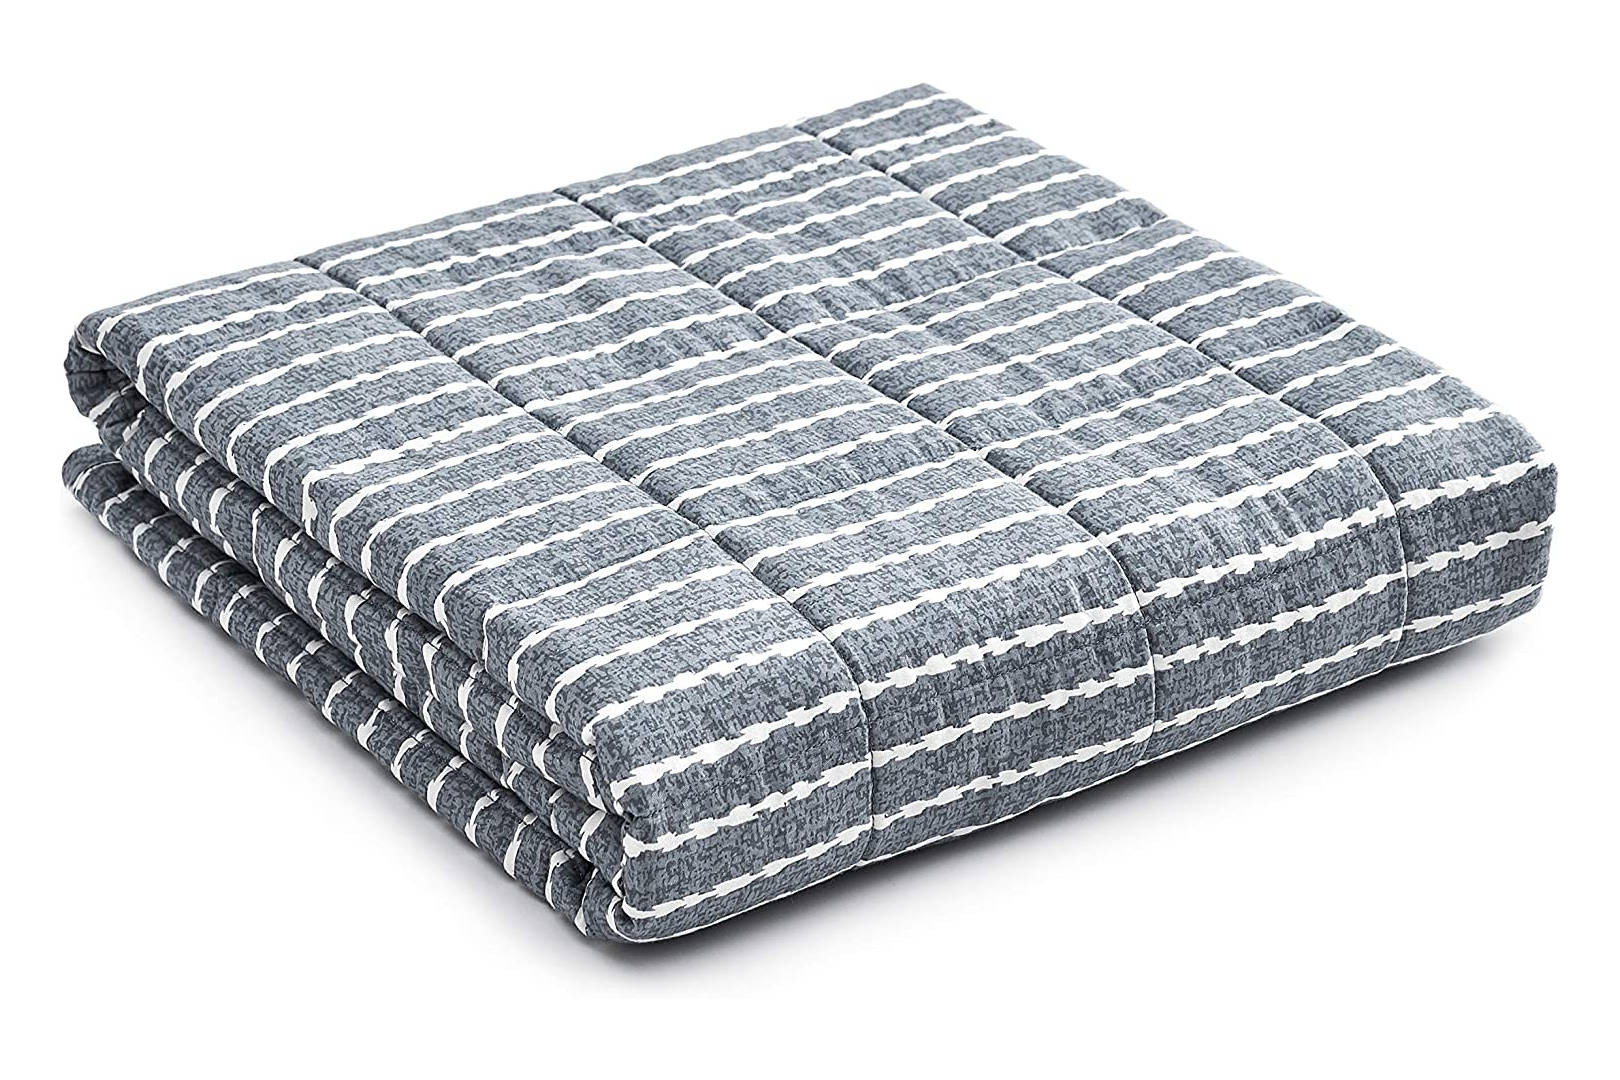 A folded YnM Weighted Blanket in blue and white colorway.